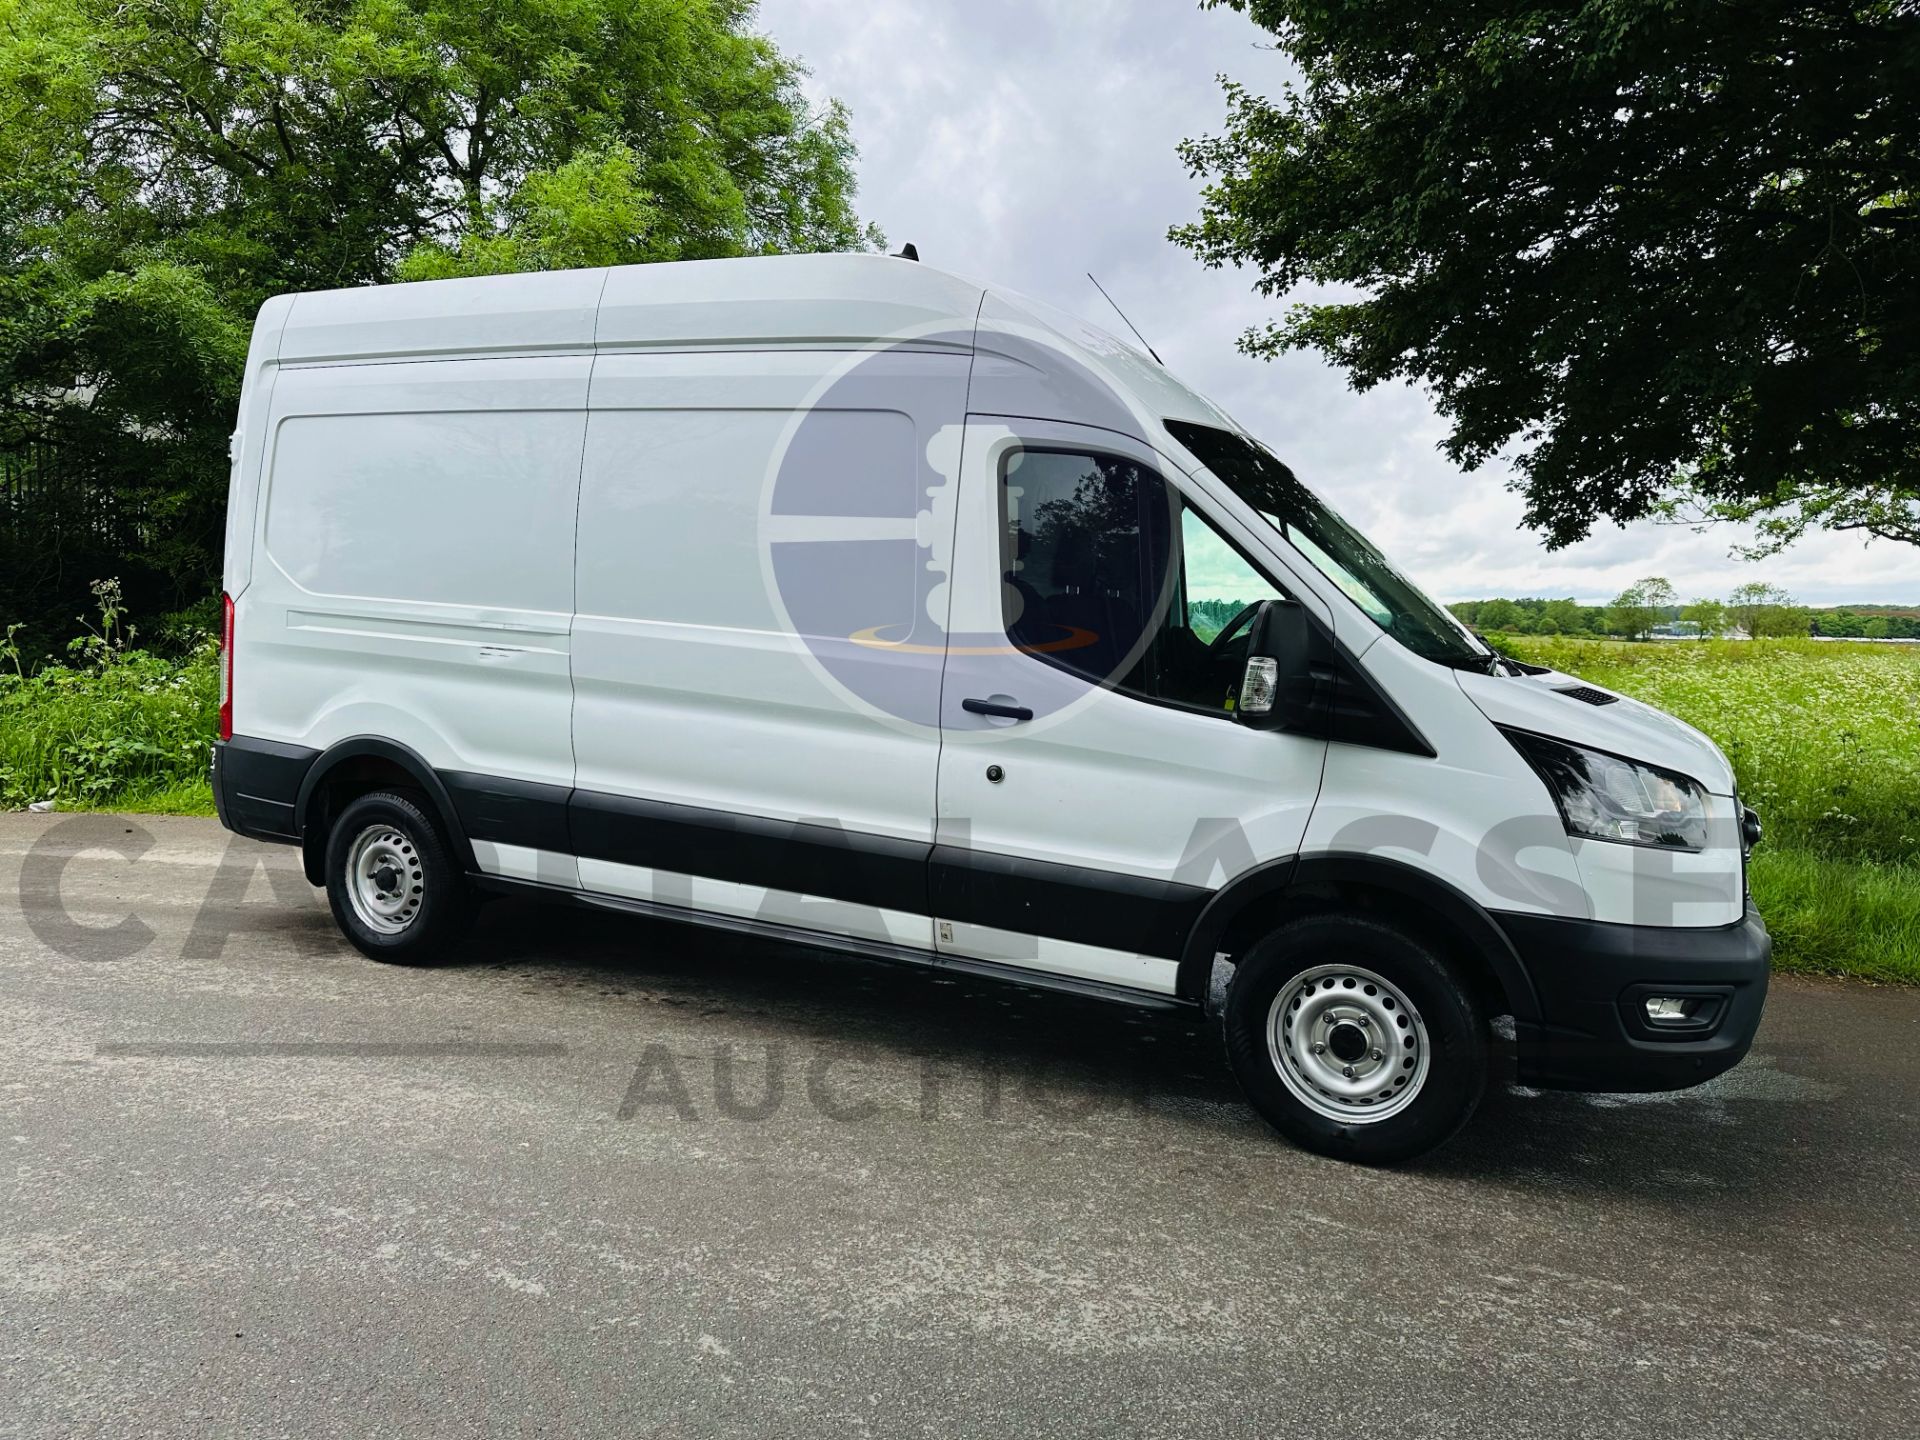 (ON SALE) FORD TRANSIT 2.0 TDCI (130) RWD LONG WHEEL BASE HIGH ROOF - 2021 70 REG - ONLY 66K MILES -